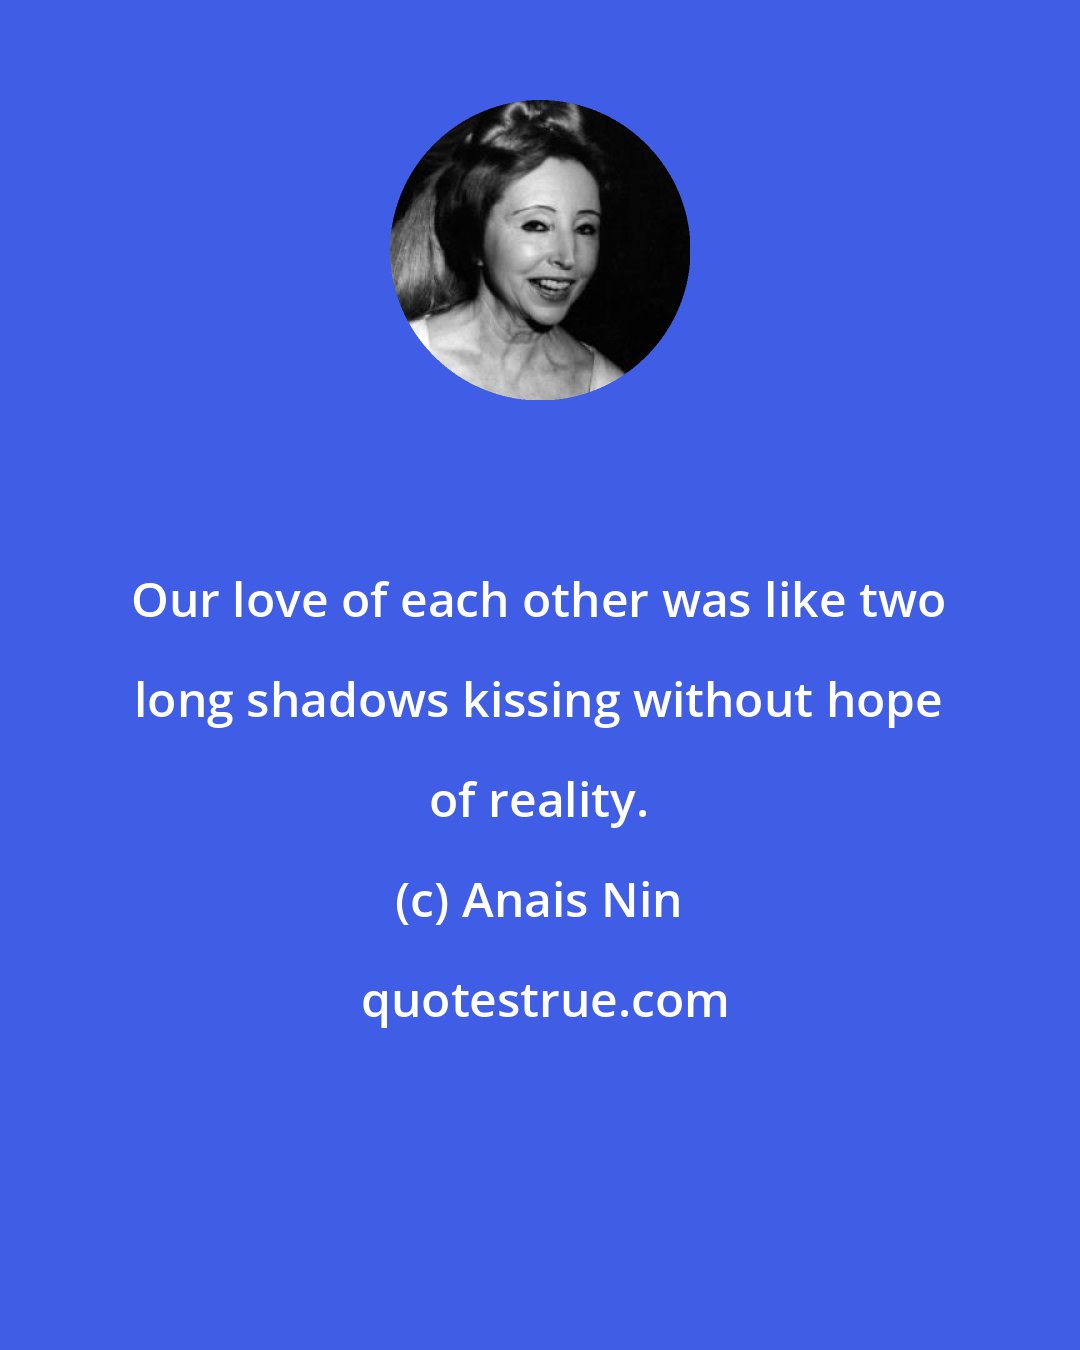 Anais Nin: Our love of each other was like two long shadows kissing without hope of reality.